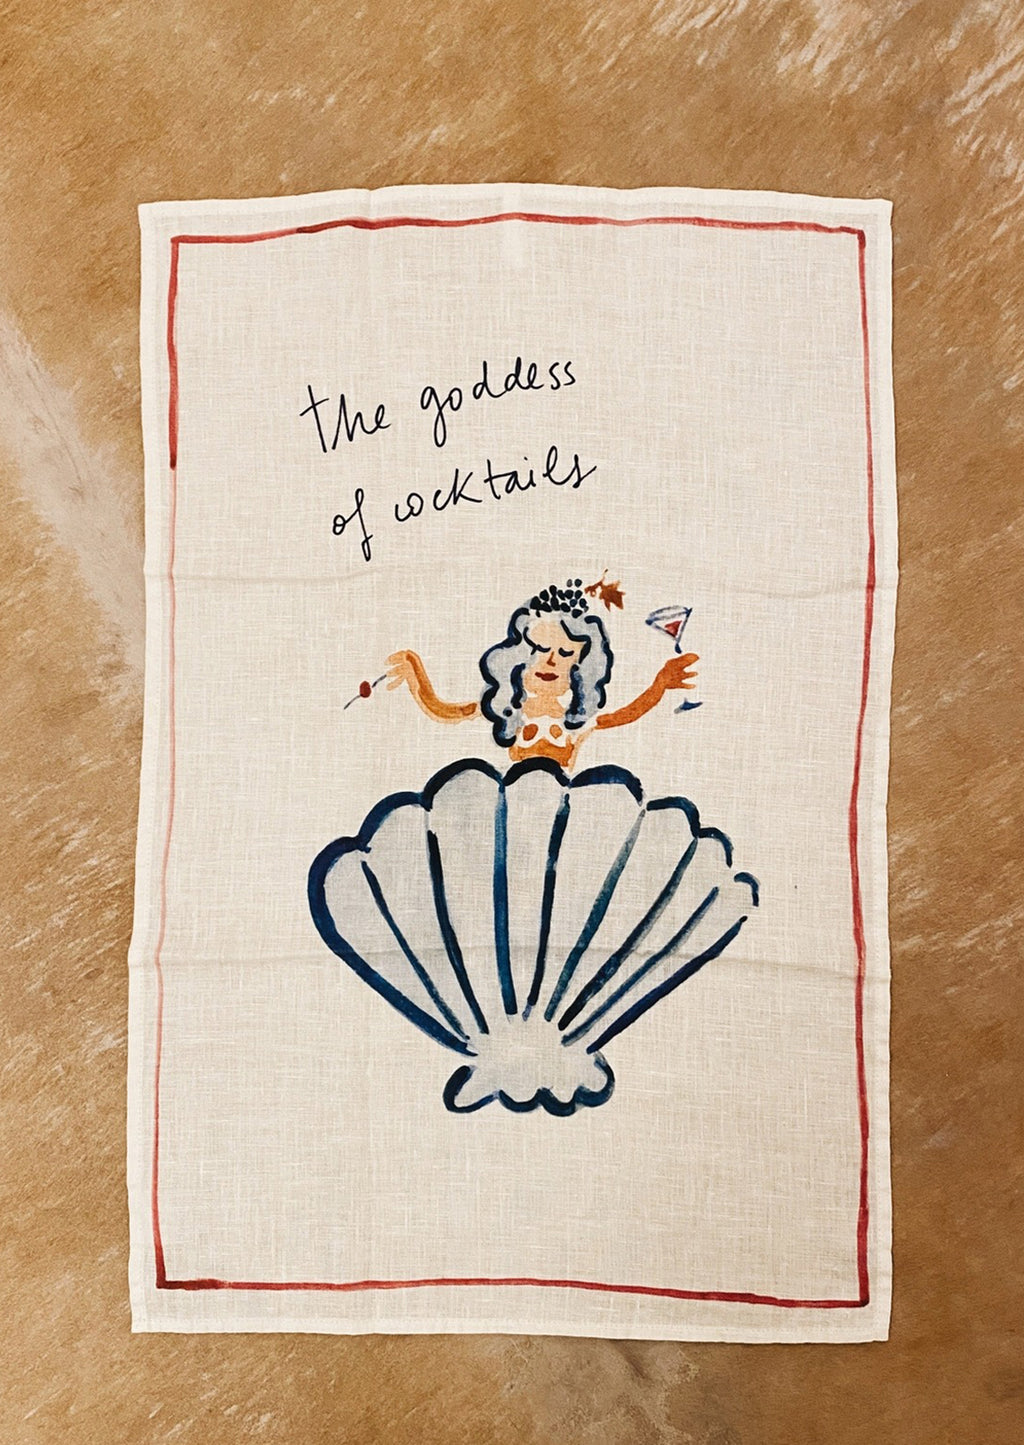 Goddess of Cocktails: A white linen tea towel with Goddess of Cocktail graphic and text.